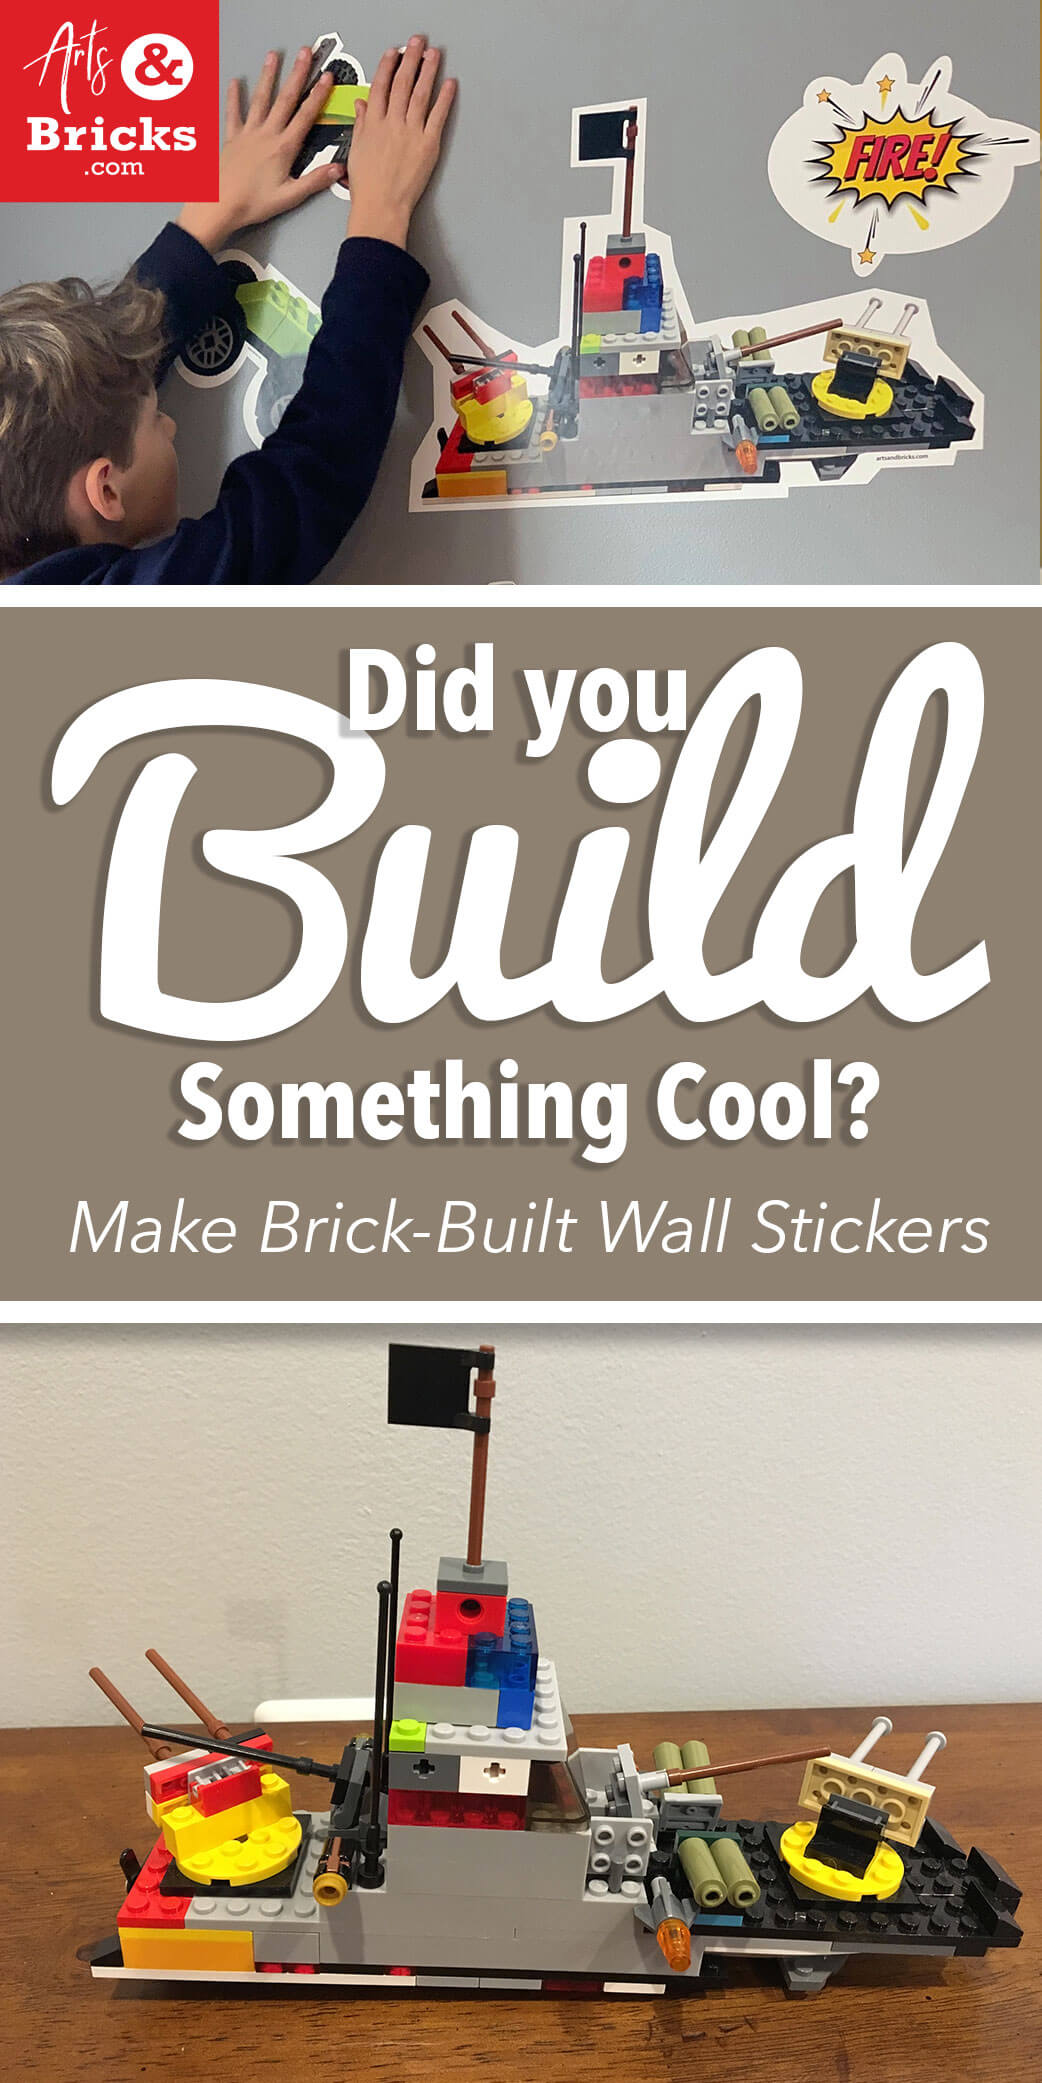 Did you build something one a kind?